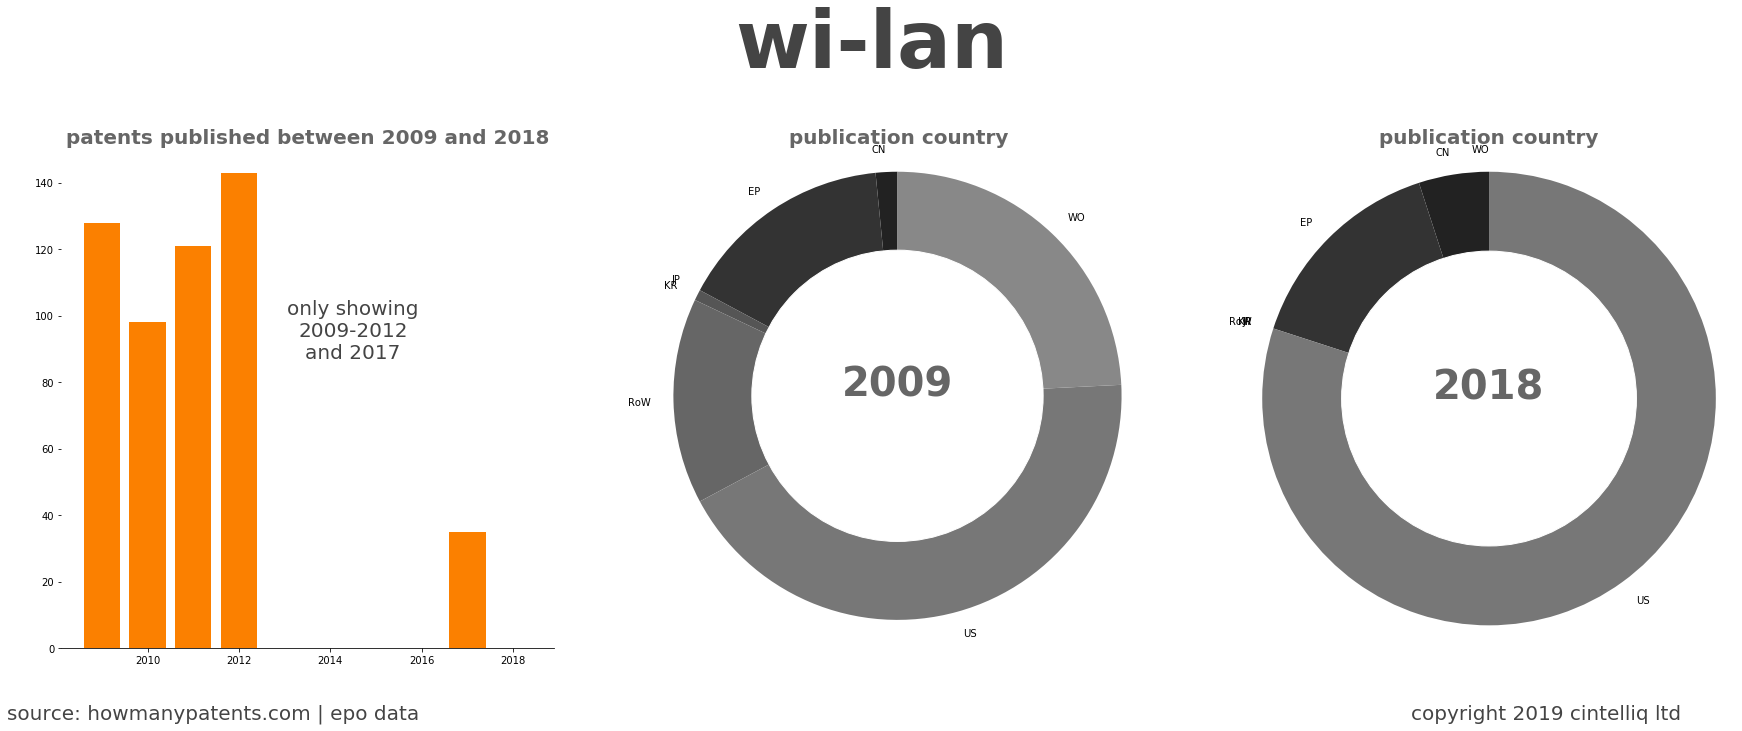 summary of patents for Wi-Lan